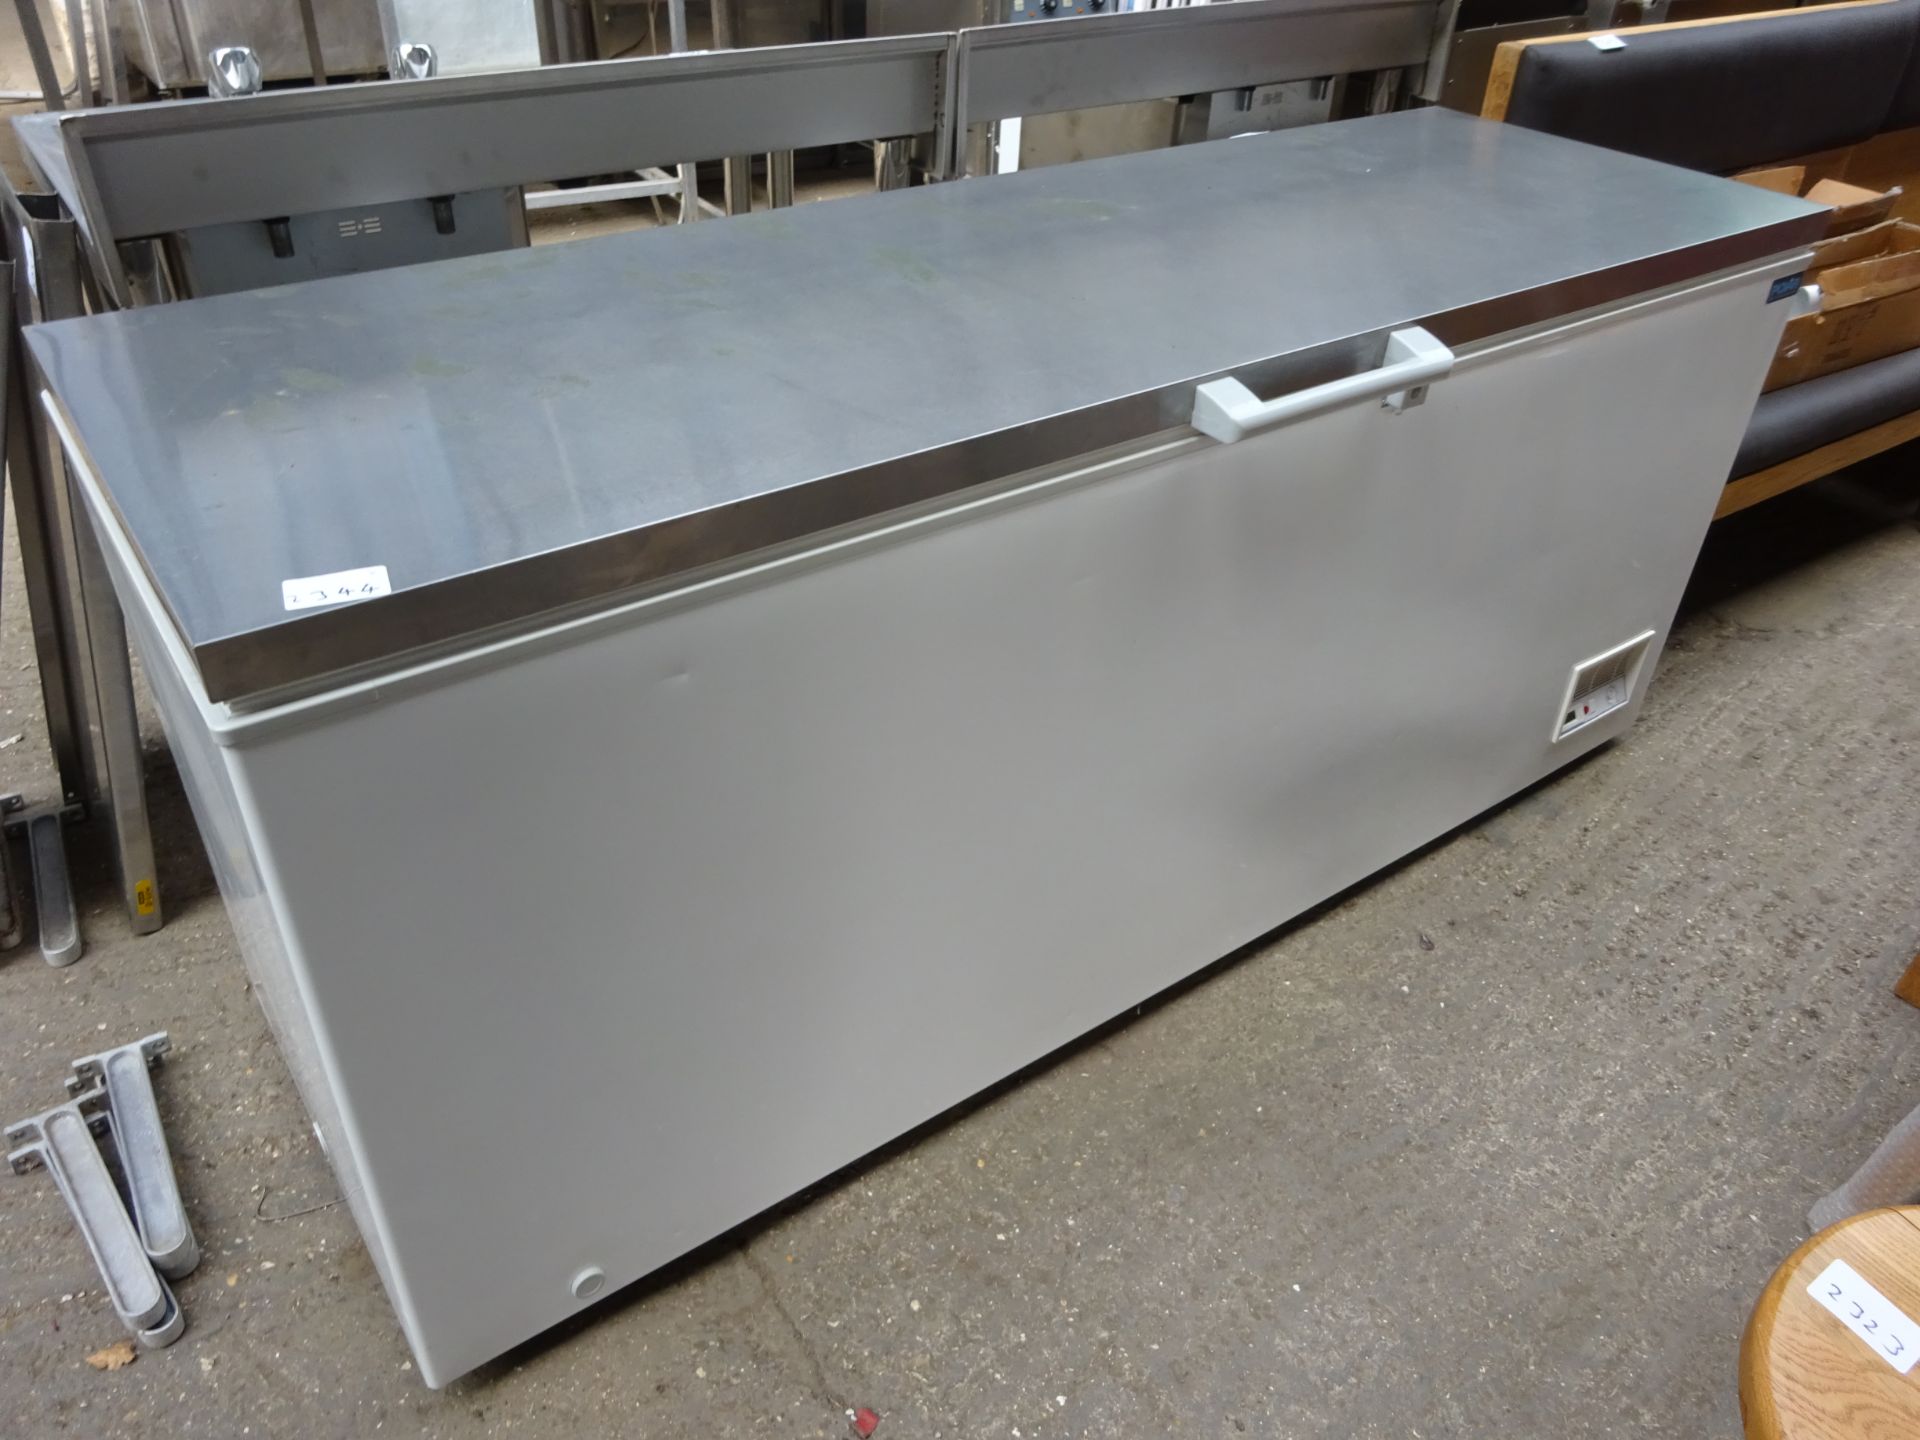 Extra large stainless steel polar chest freezer.